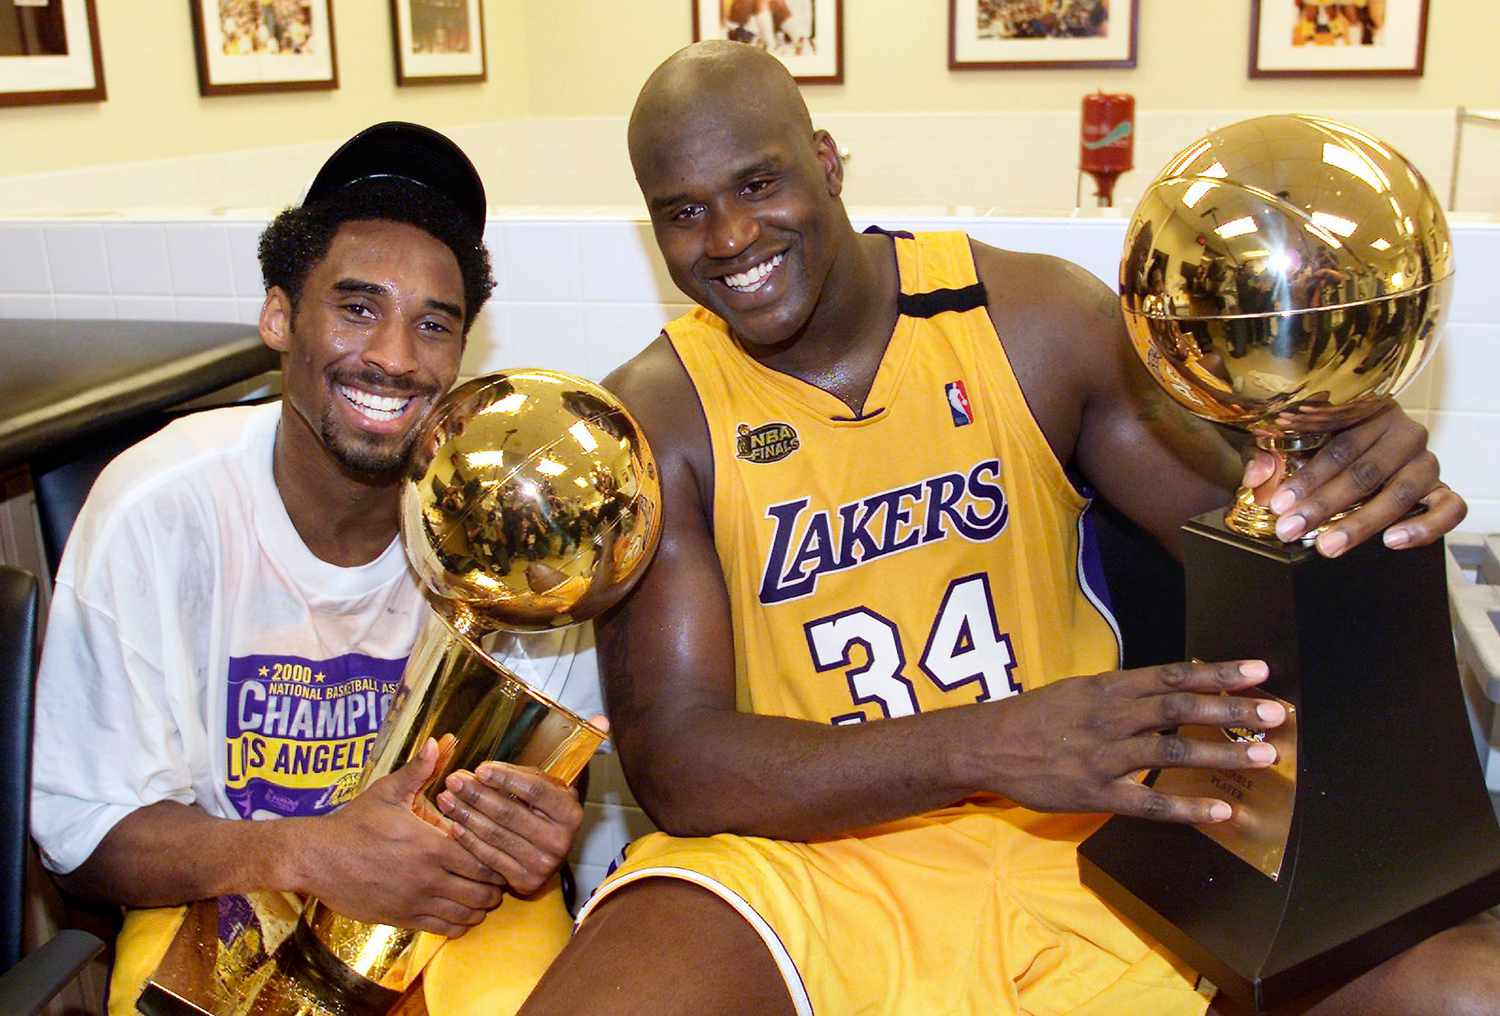 Los Angeles Lakers, Jerry West, Shaquille O'Neal, Kobe Bryant